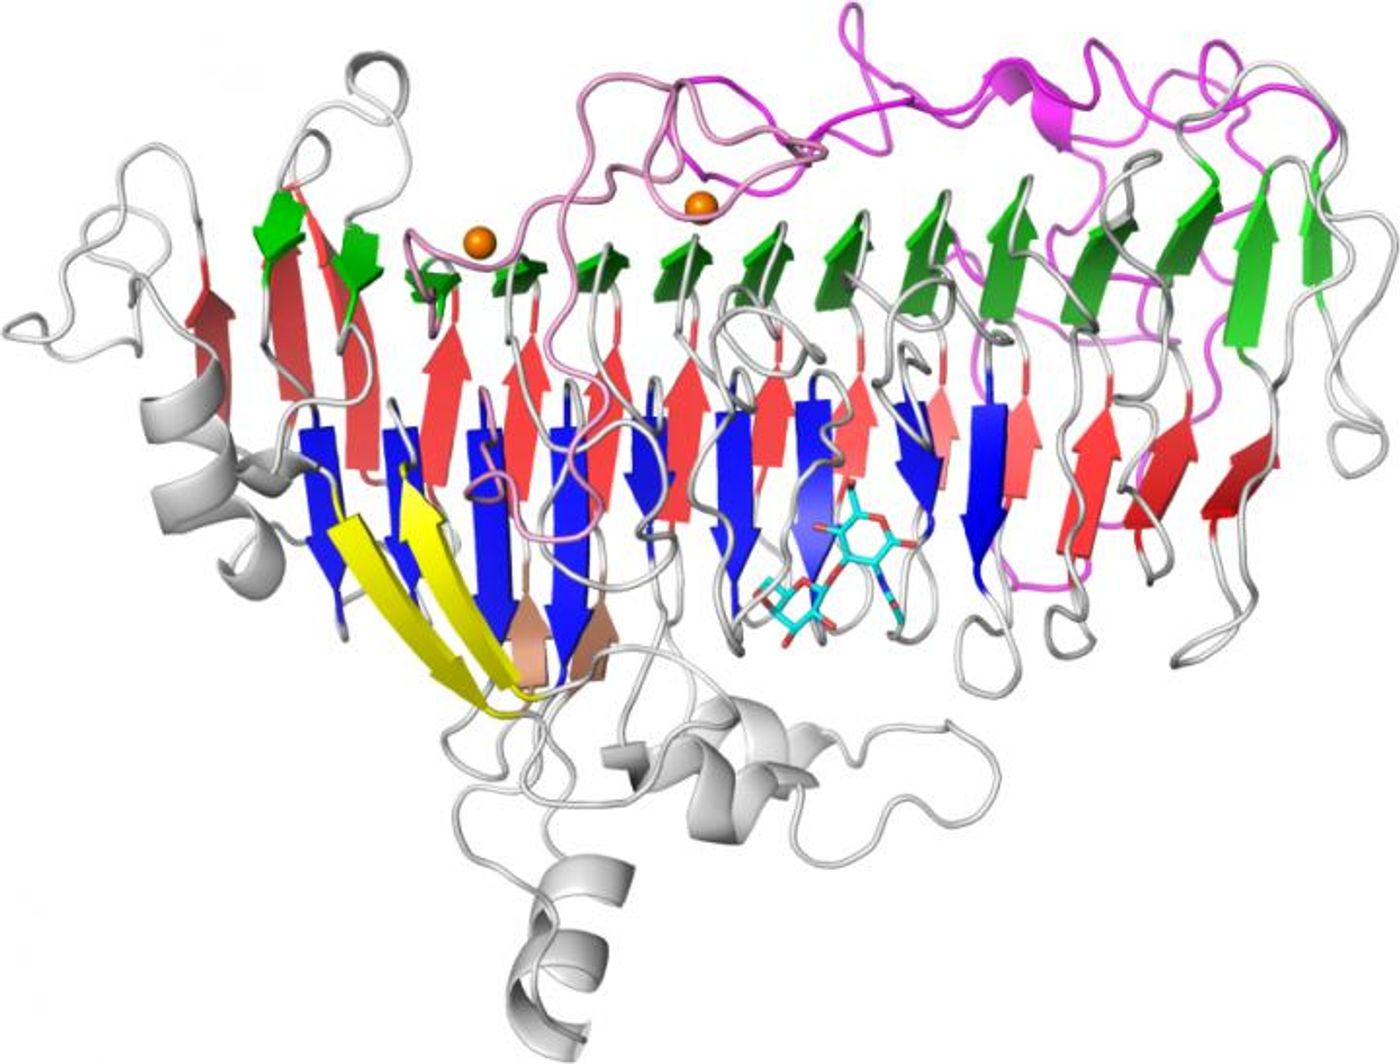 This image shows the molecular structure of lacto-N-biosidase LnbX, an enzyme from a symbiotic bacteria (B. longum) in infants' gut to break down sugars in breast milk. / Credit: Yamada and Gotoh et al.